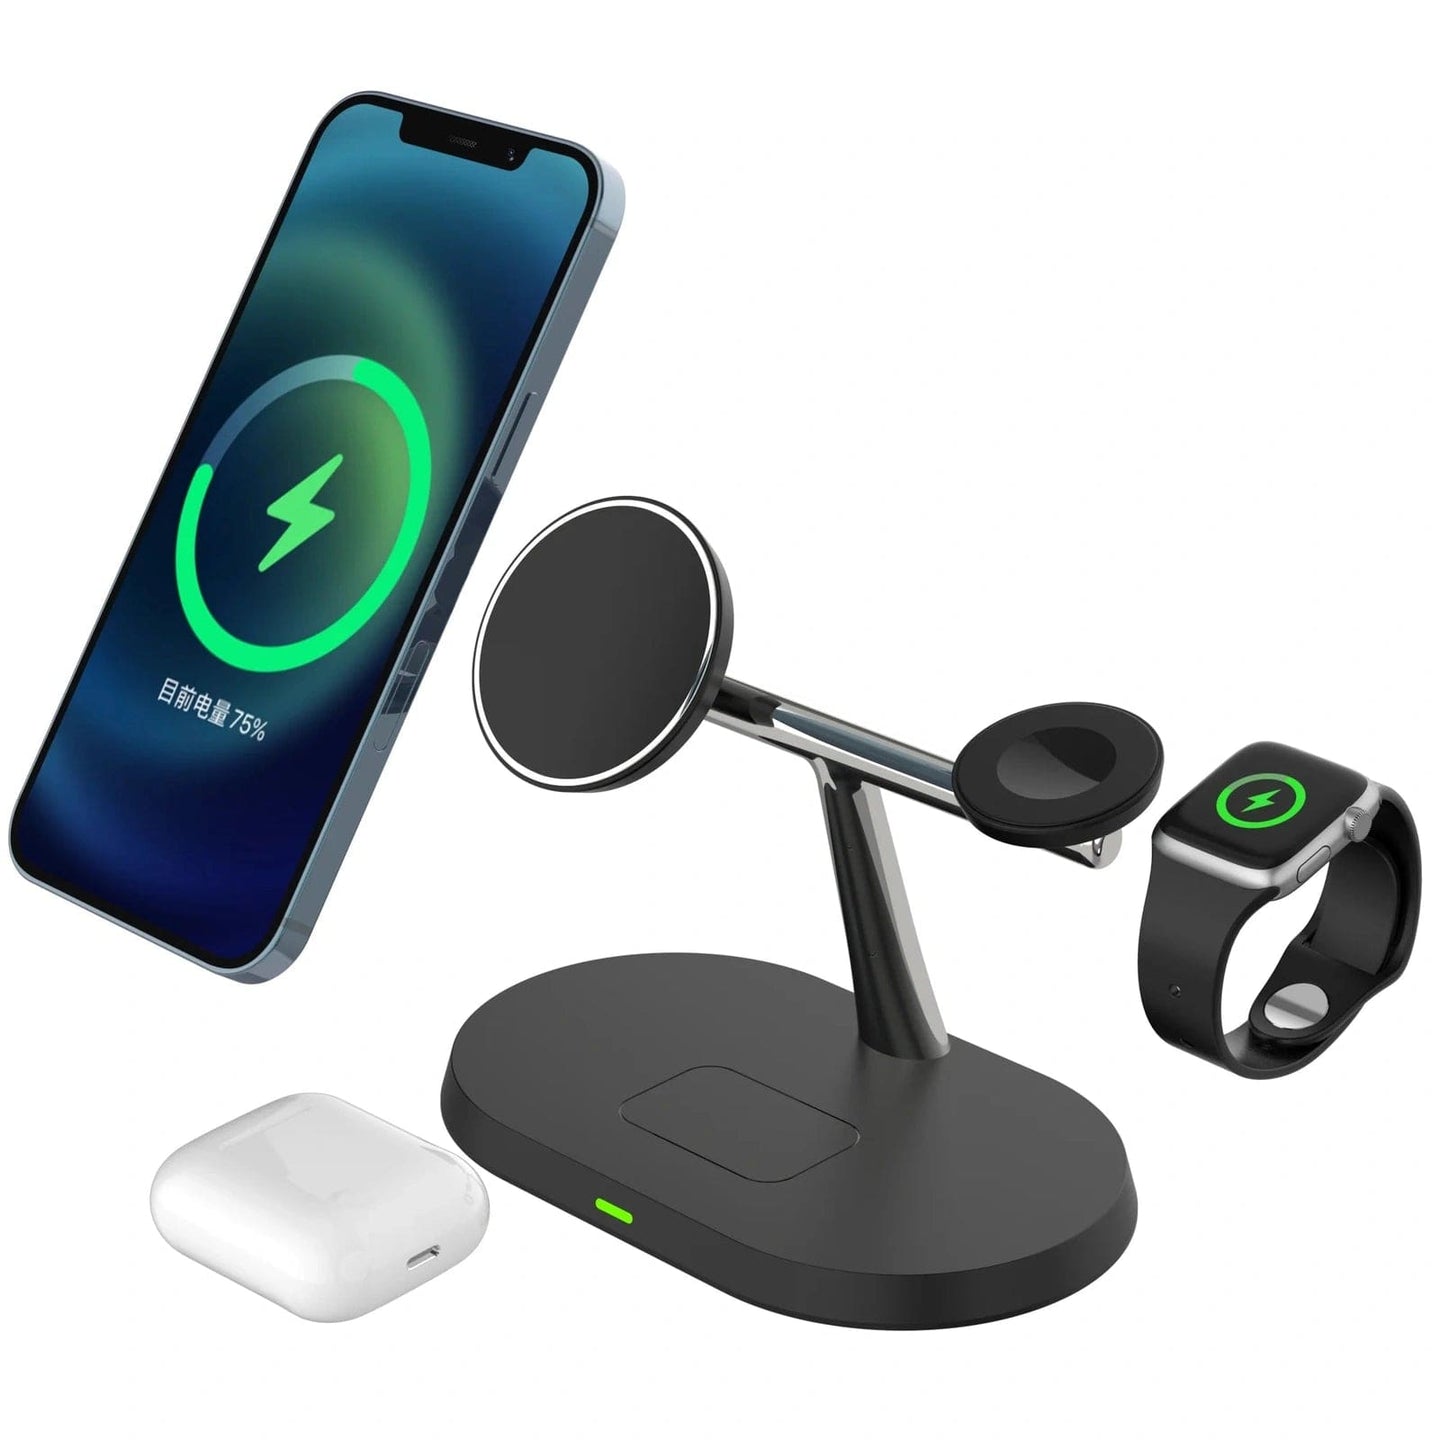 Powerful Convenience: 15W 3-in-1 Magnetic Wireless Charger Stand for iPhone 12, 13 Pro Max, Apple Watch, and AirPods Pro